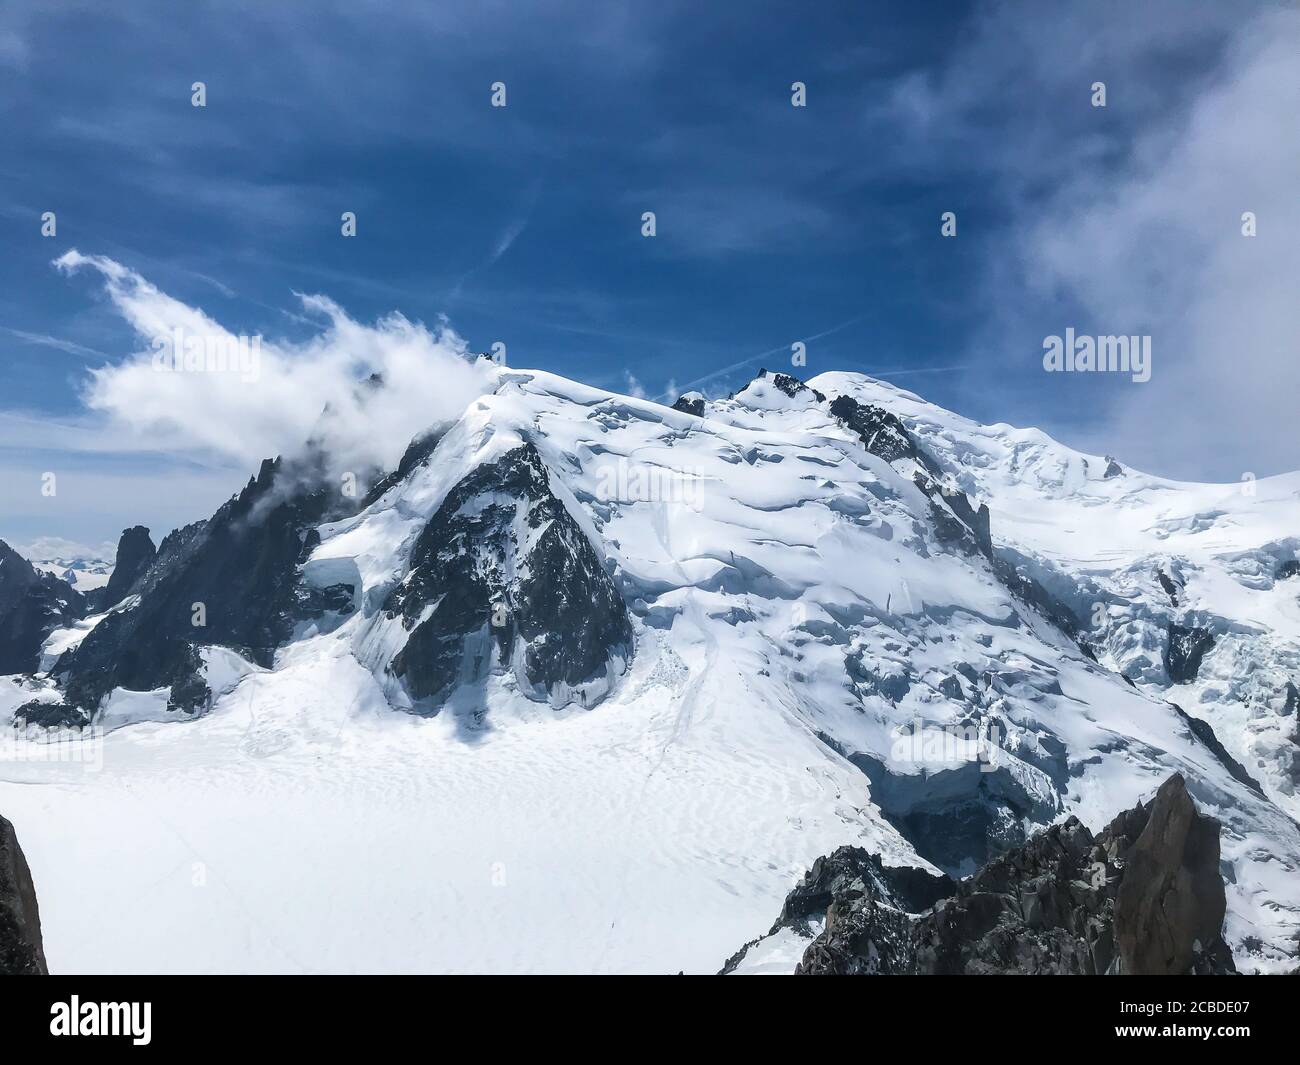 Chamonix-Mont-Blanc near the junction of France, Switzerland and Italy. Mont Blanc, the highest summit in the Alps, it is renowned for it its skiing. Stock Photo